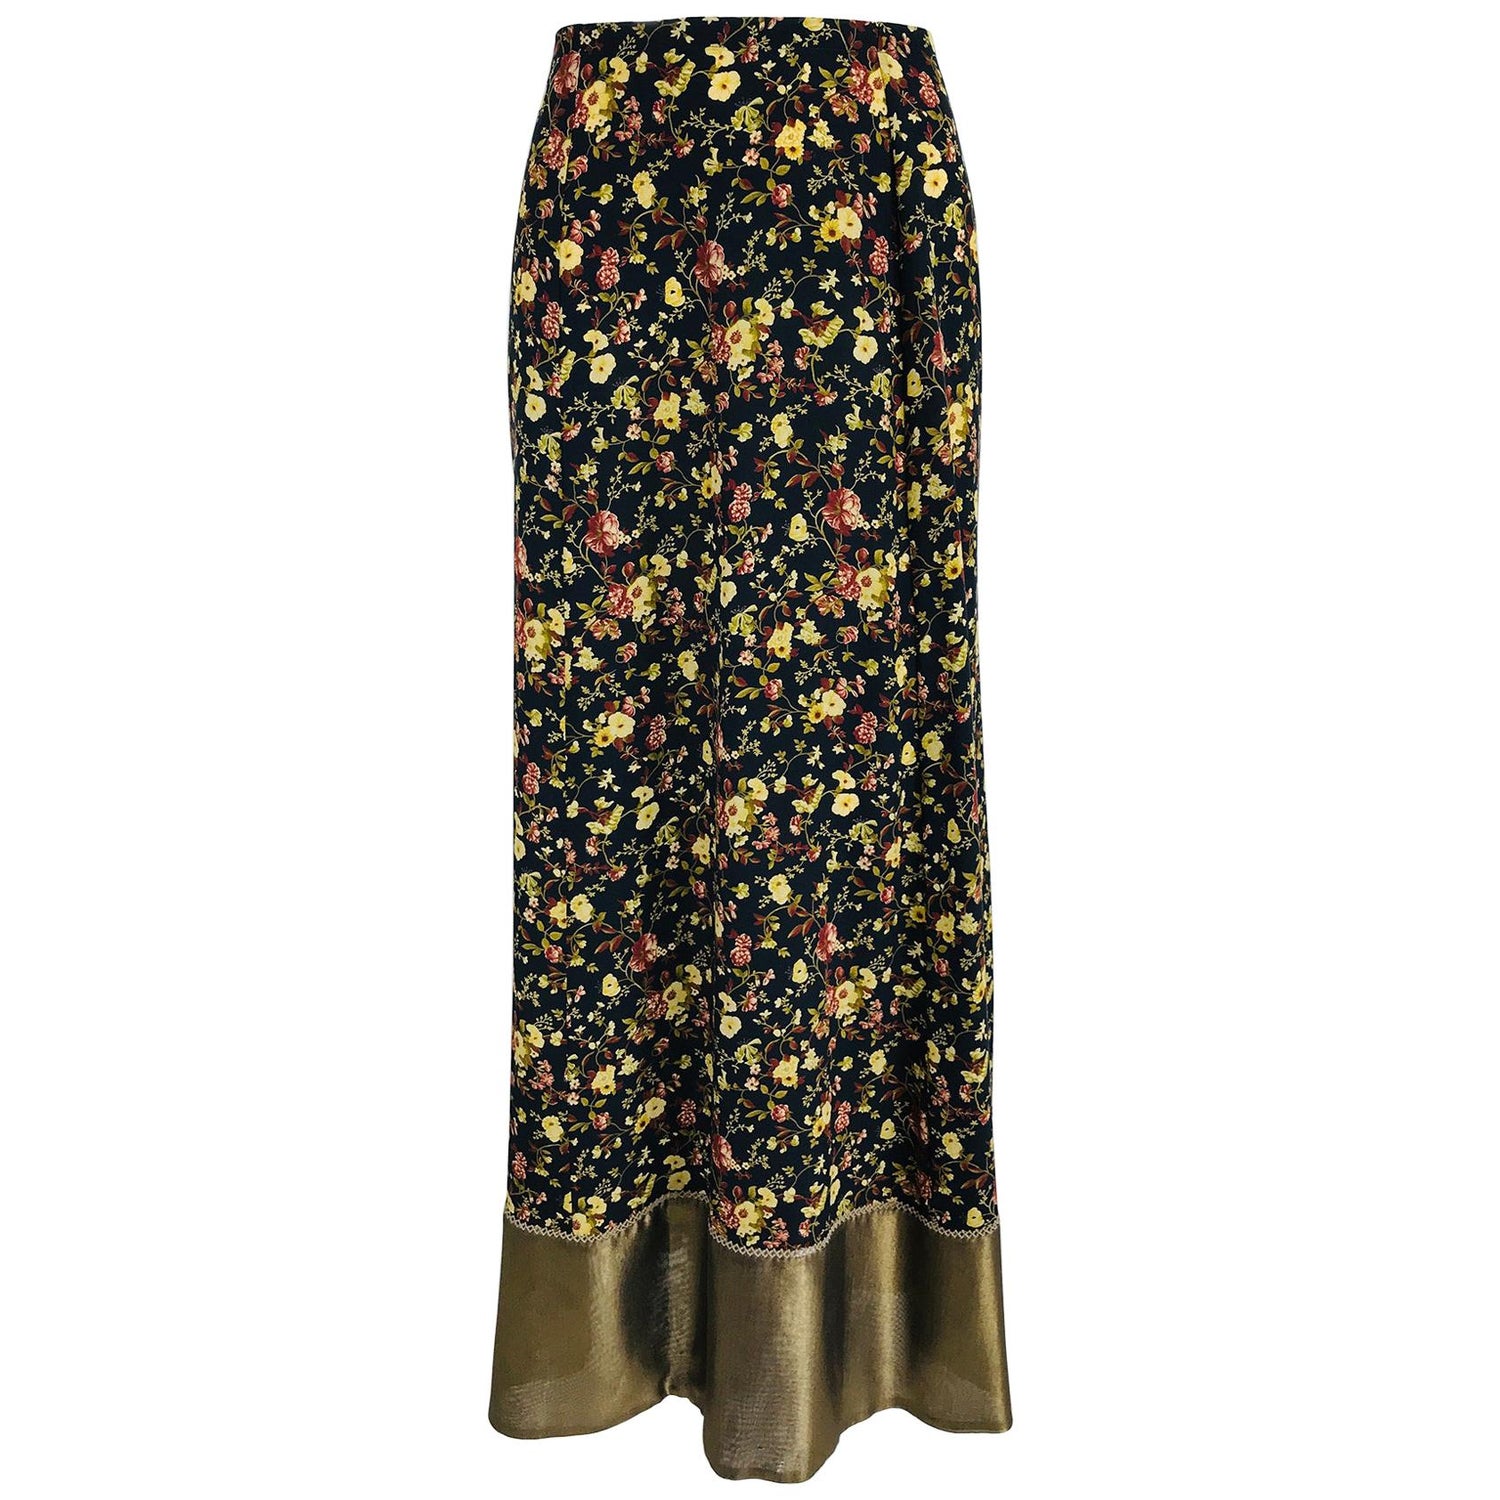 Gold Maxi Skirt - 11 For Sale on 1stDibs